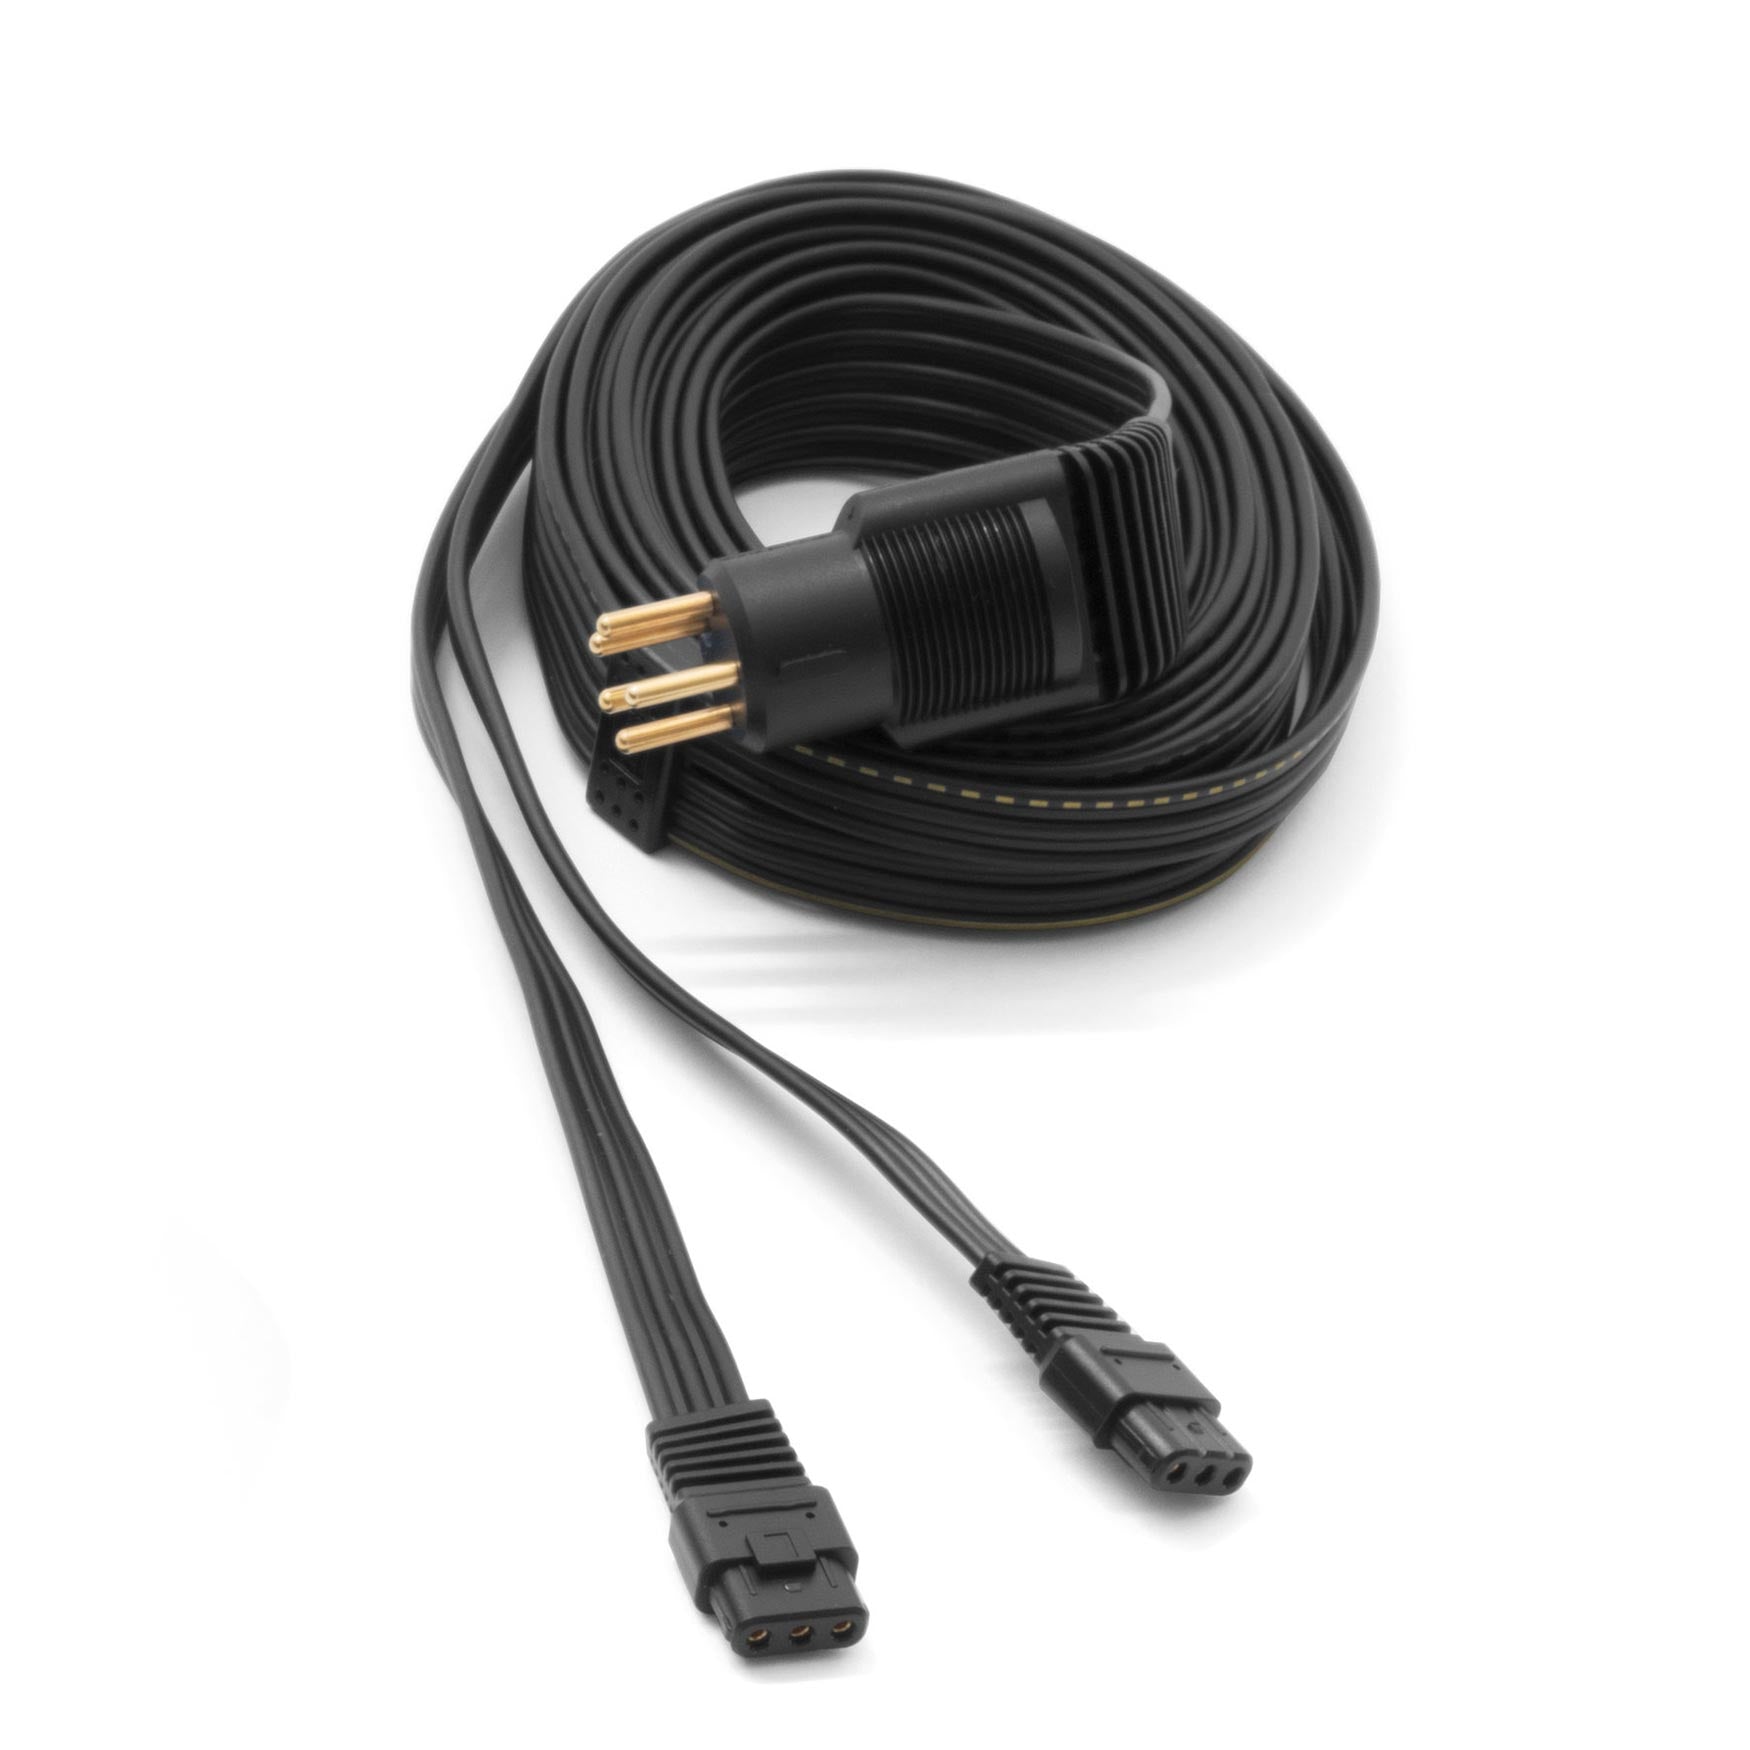 STAX Replacement Cable for SR-X9000 and SR-L700mk2